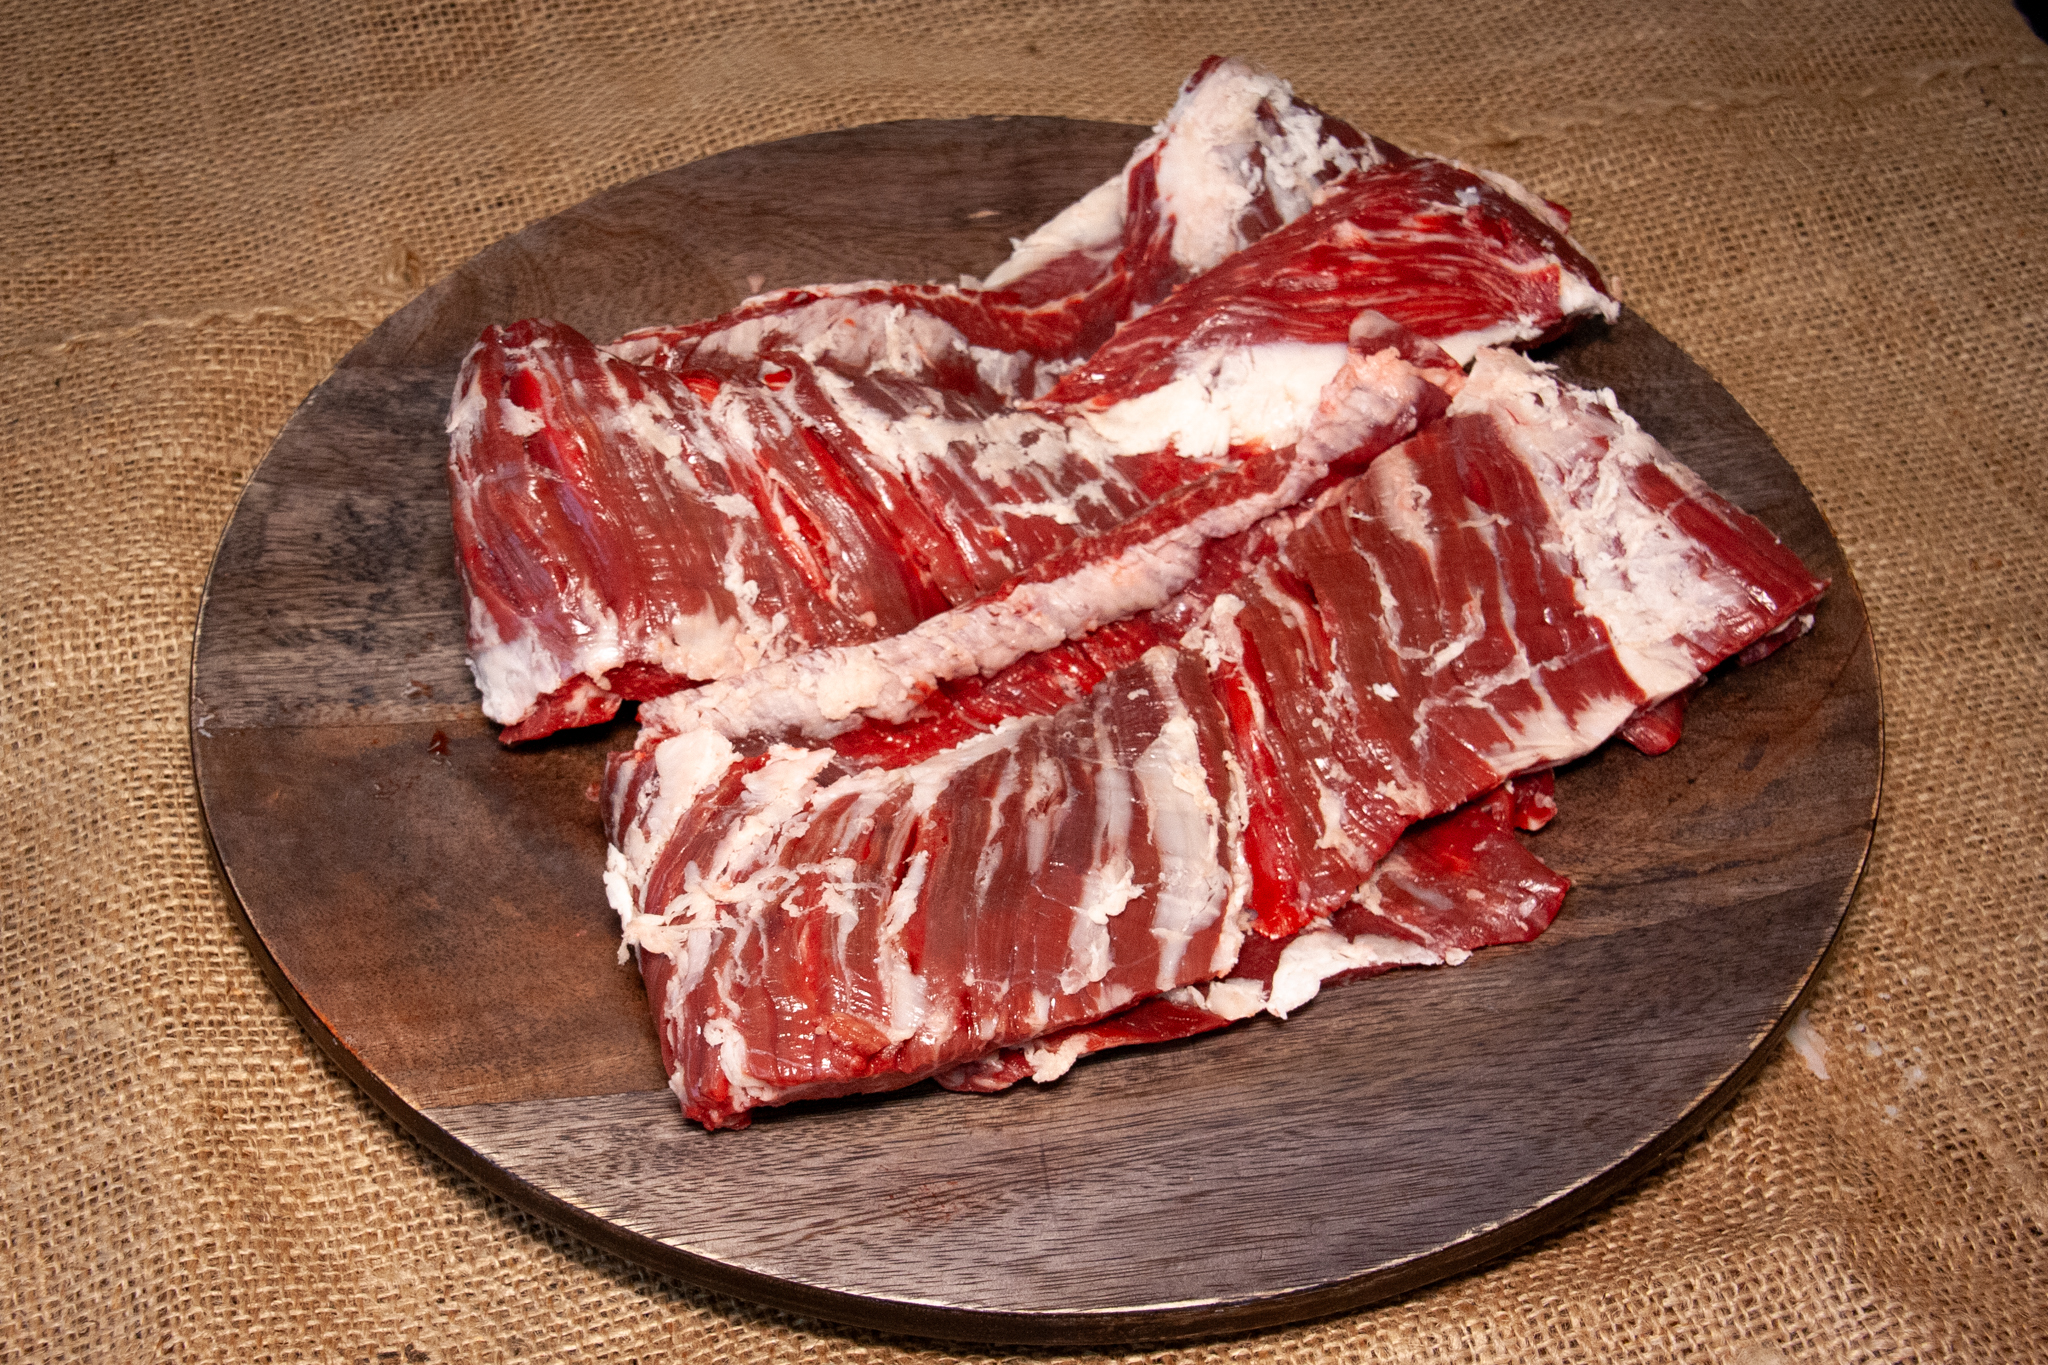 Ebert Grown USDA graded Skirt Steak available at Salmon's Meat Products and online for shipping